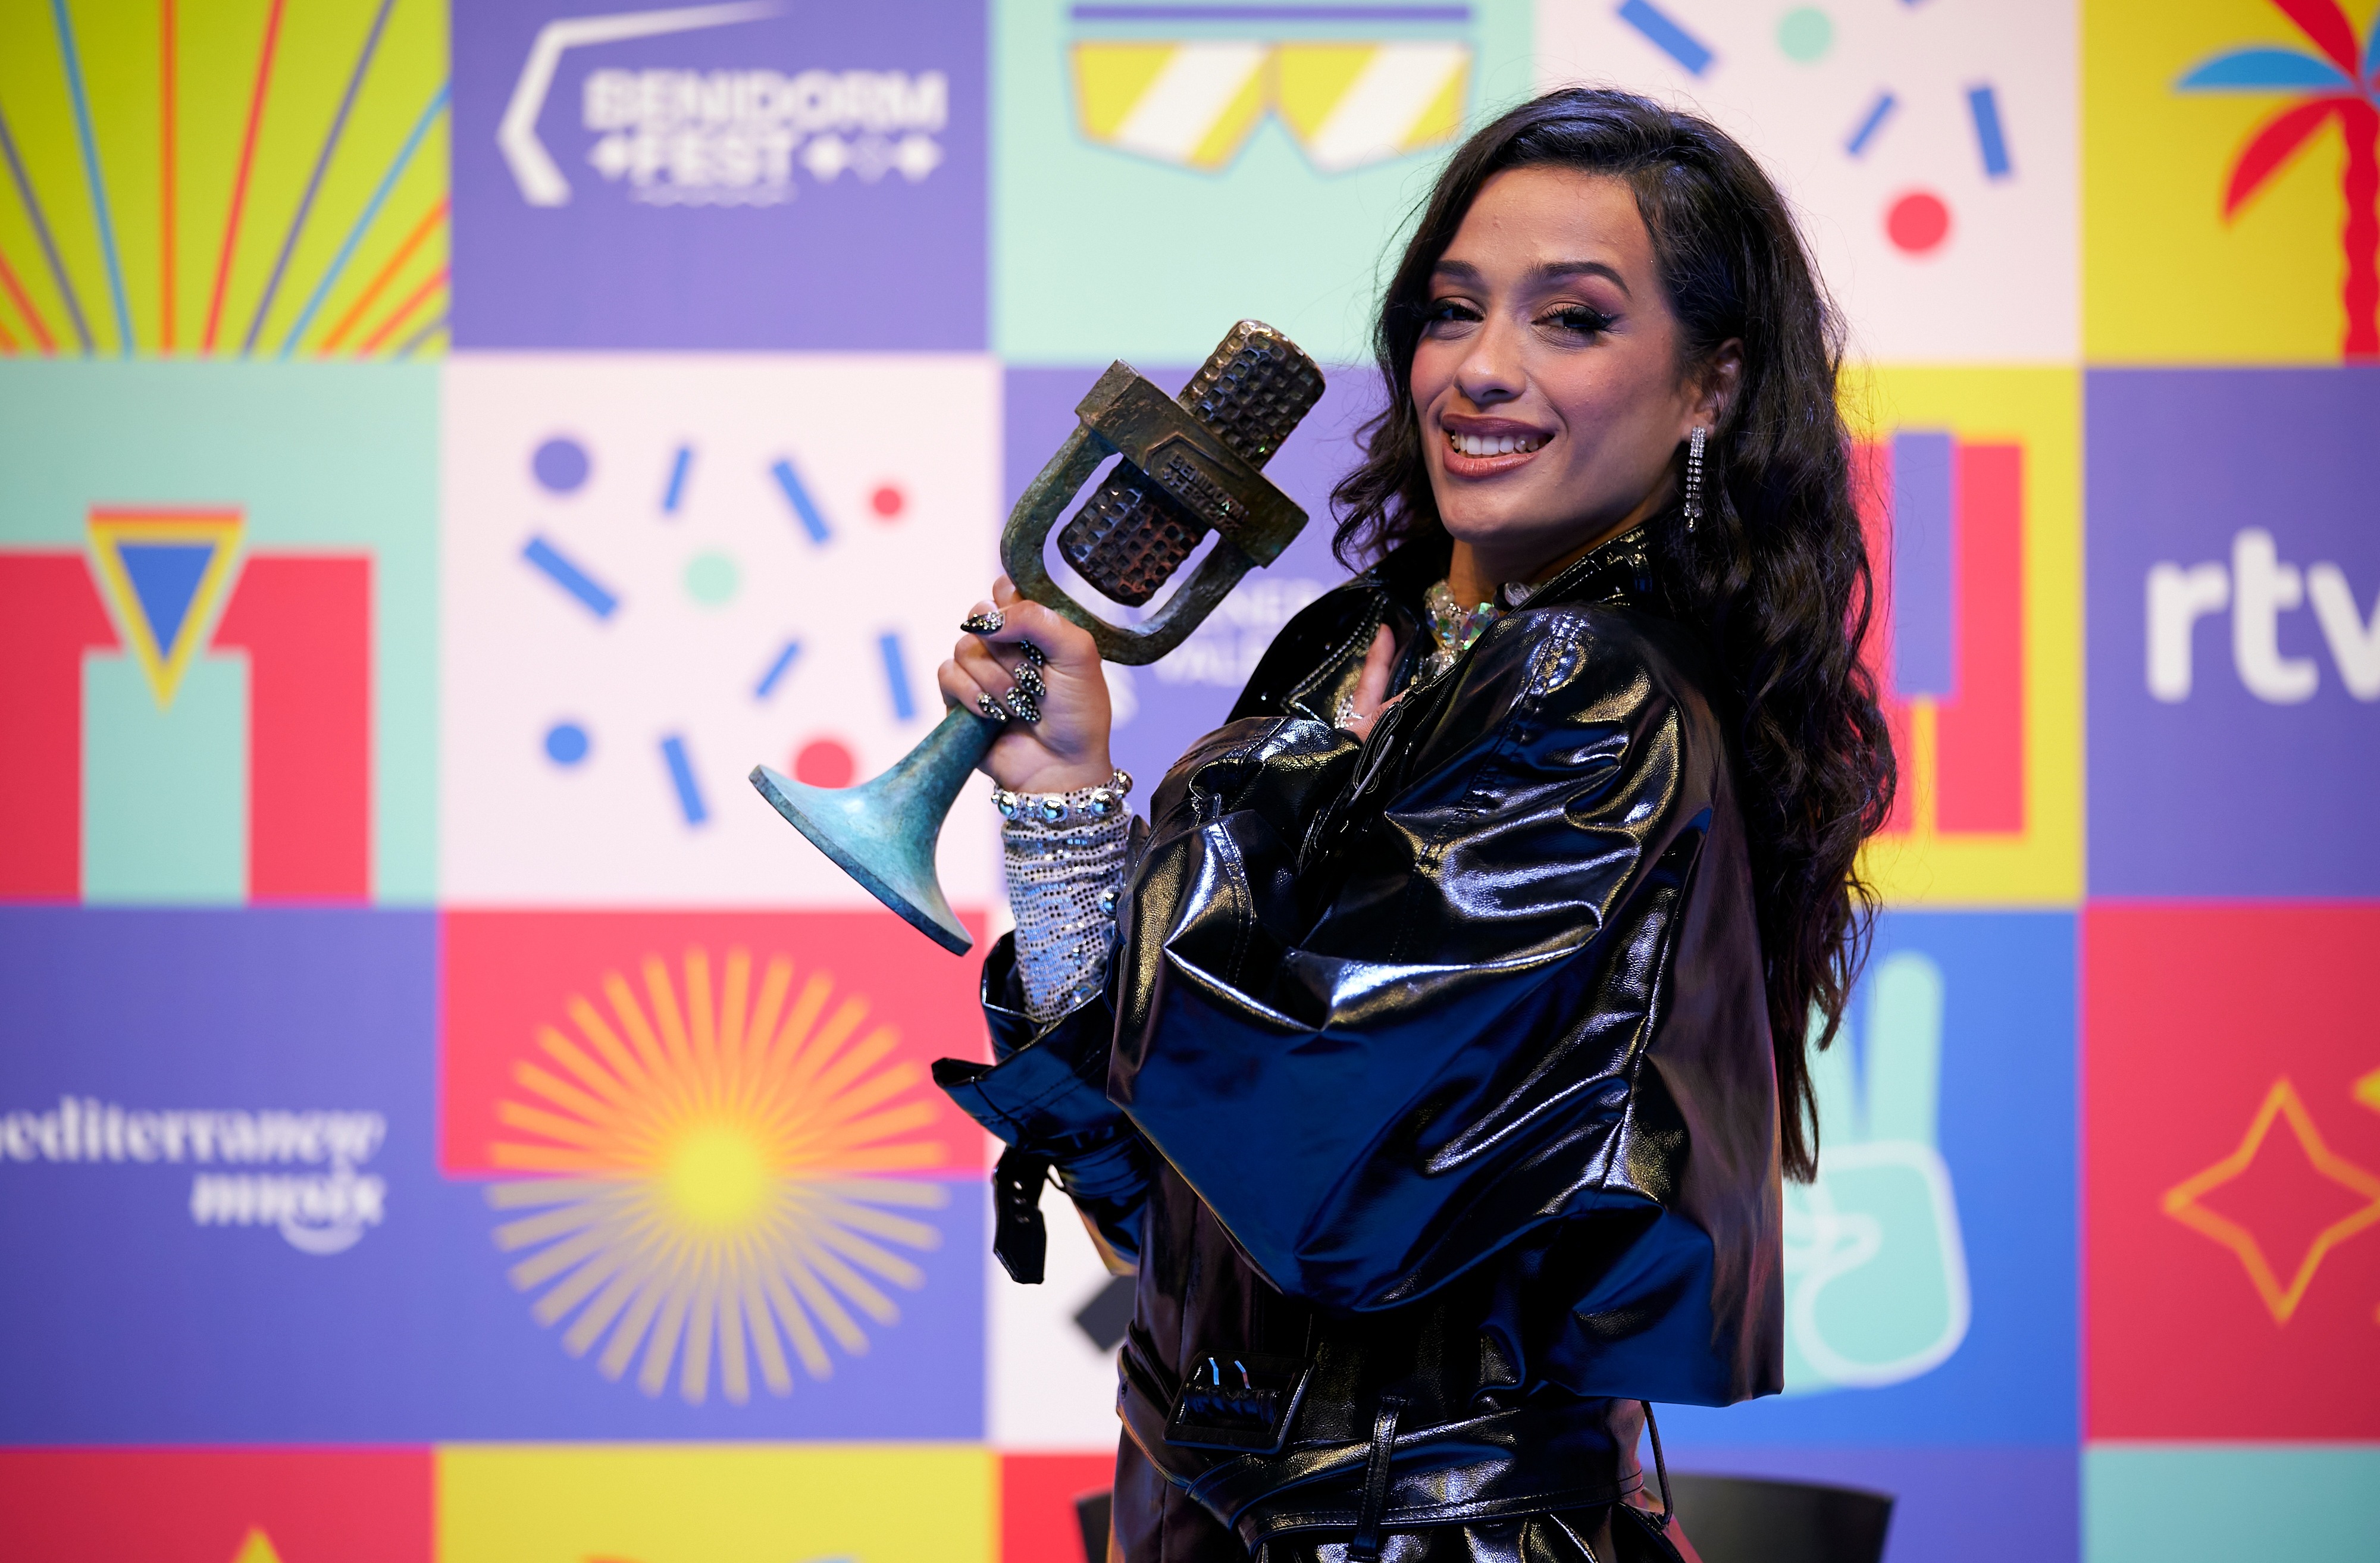 Who is Spain's Eurovision entry Chanel?